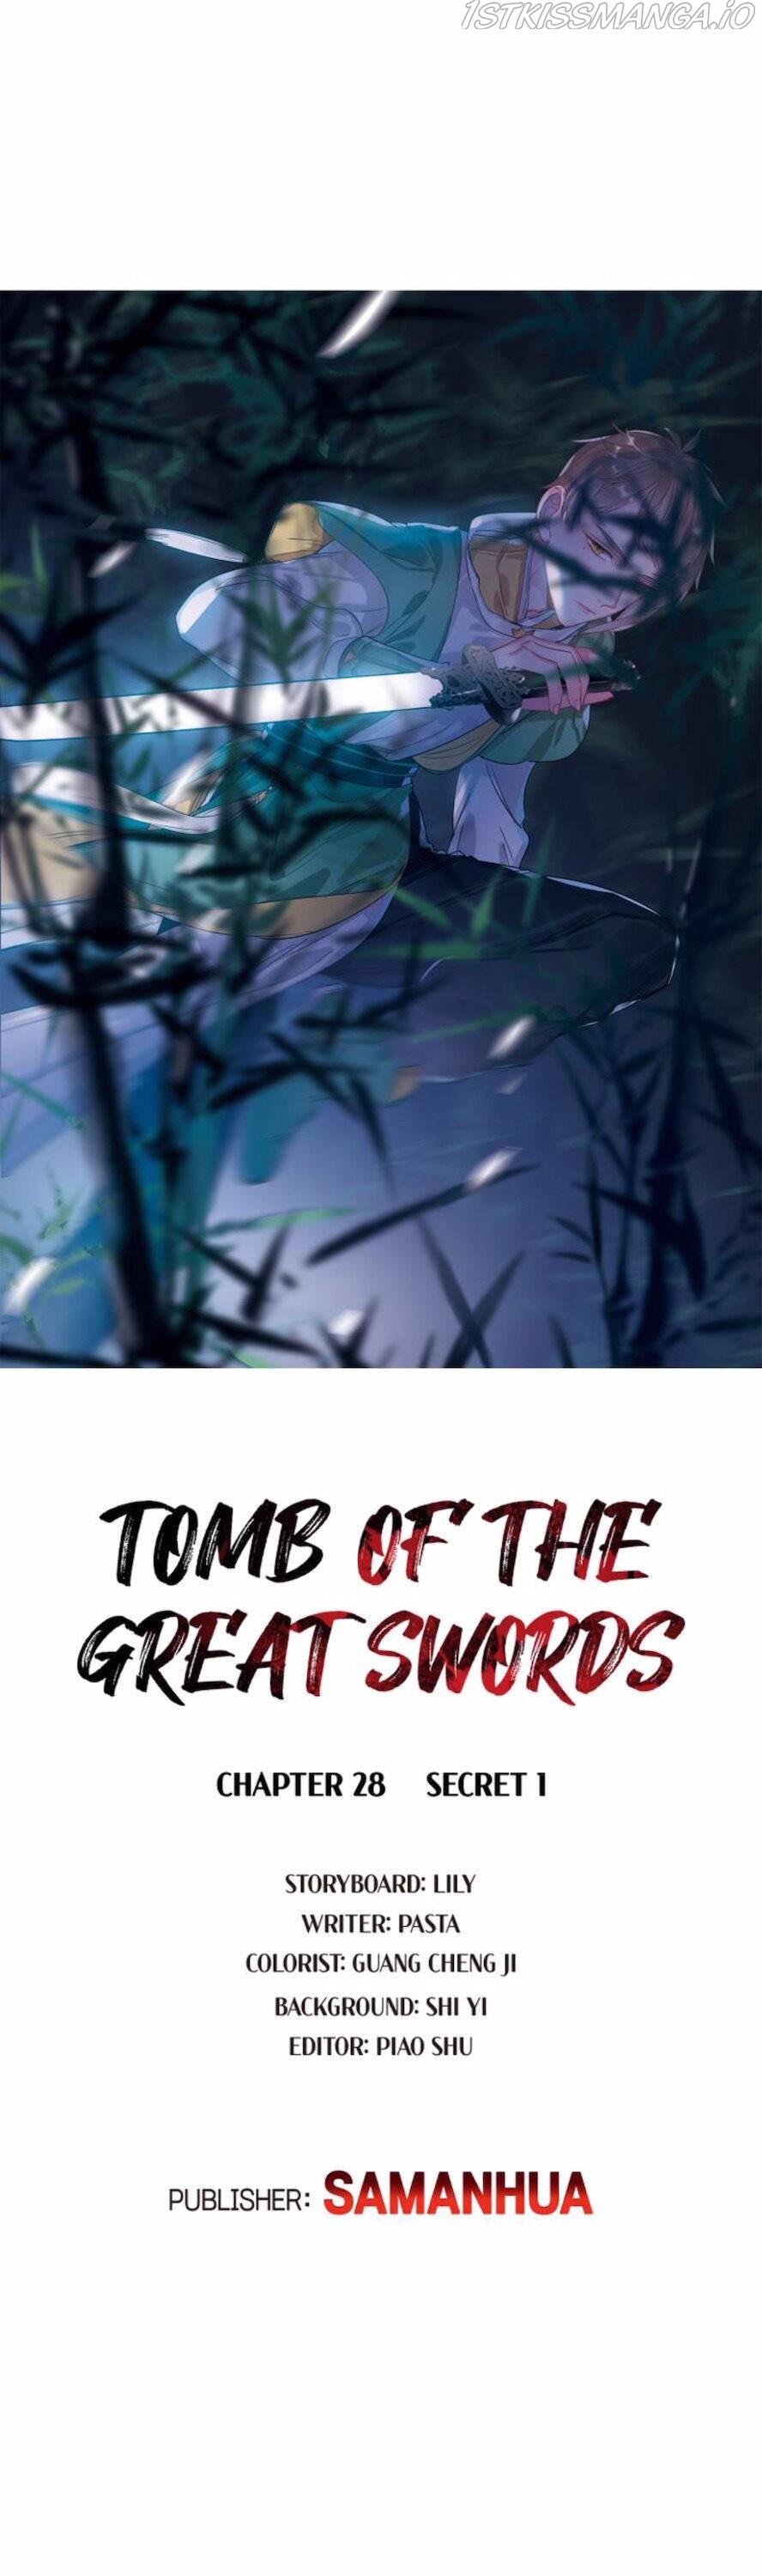 The Tomb of Famed Swords chapter 28